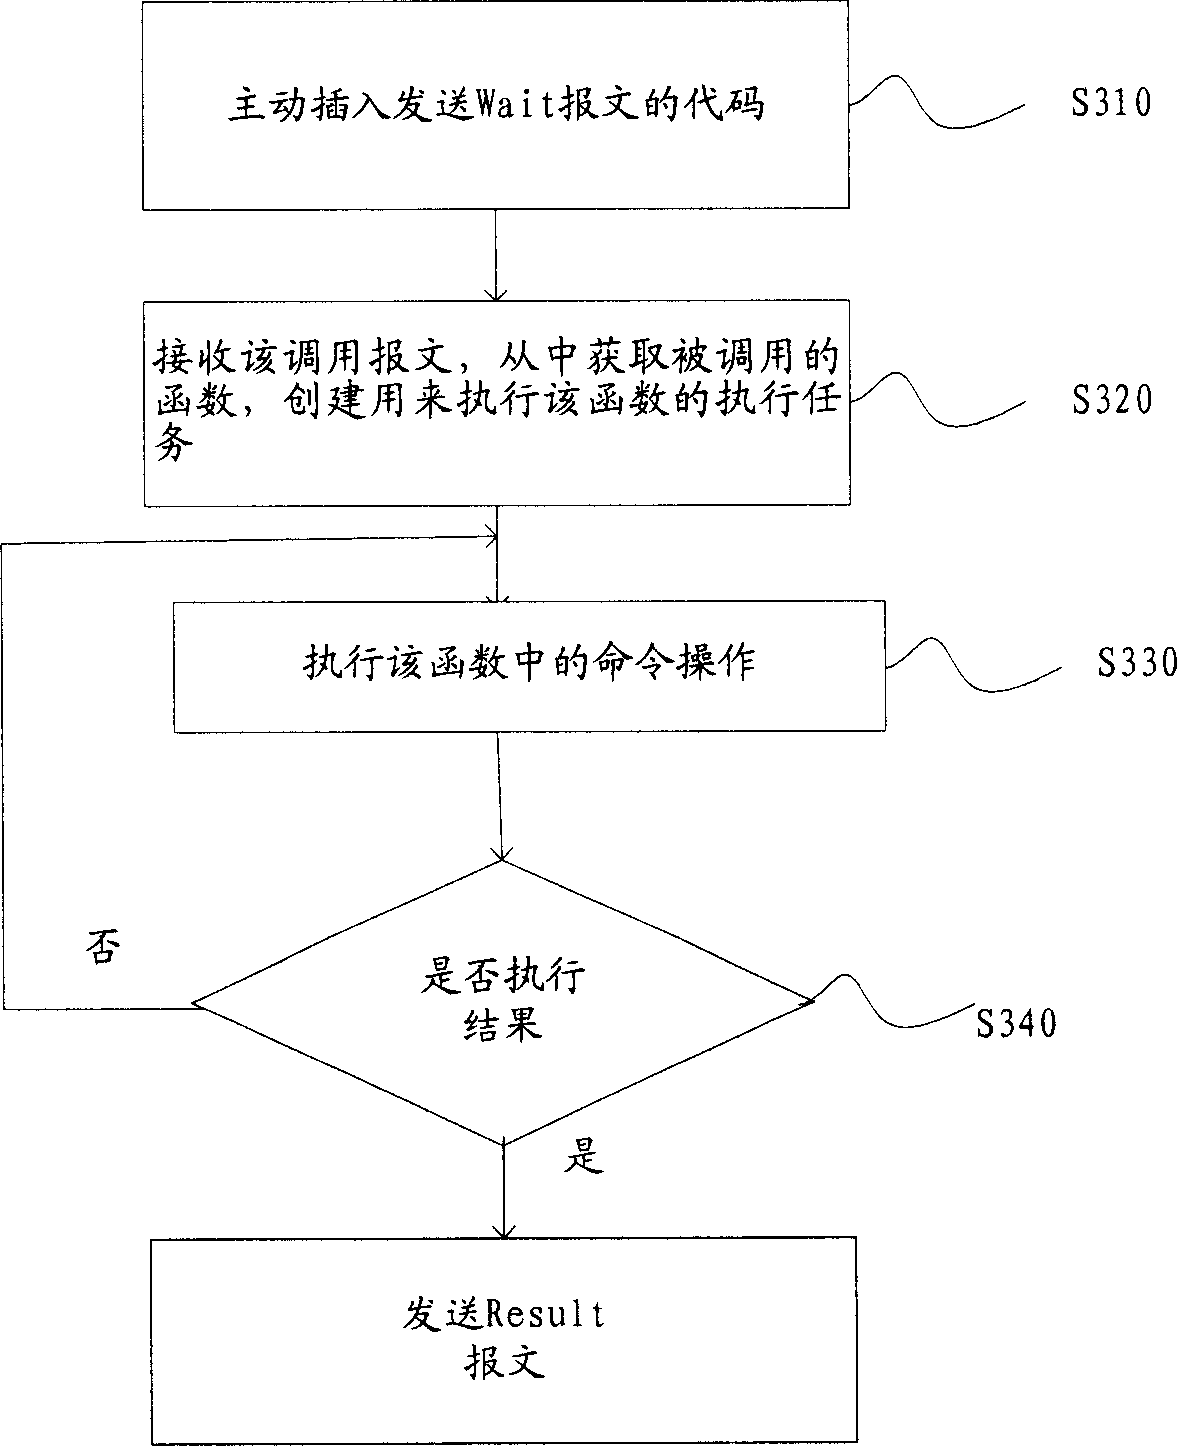 Time-out adaptive method in remote synchronous calling procedure